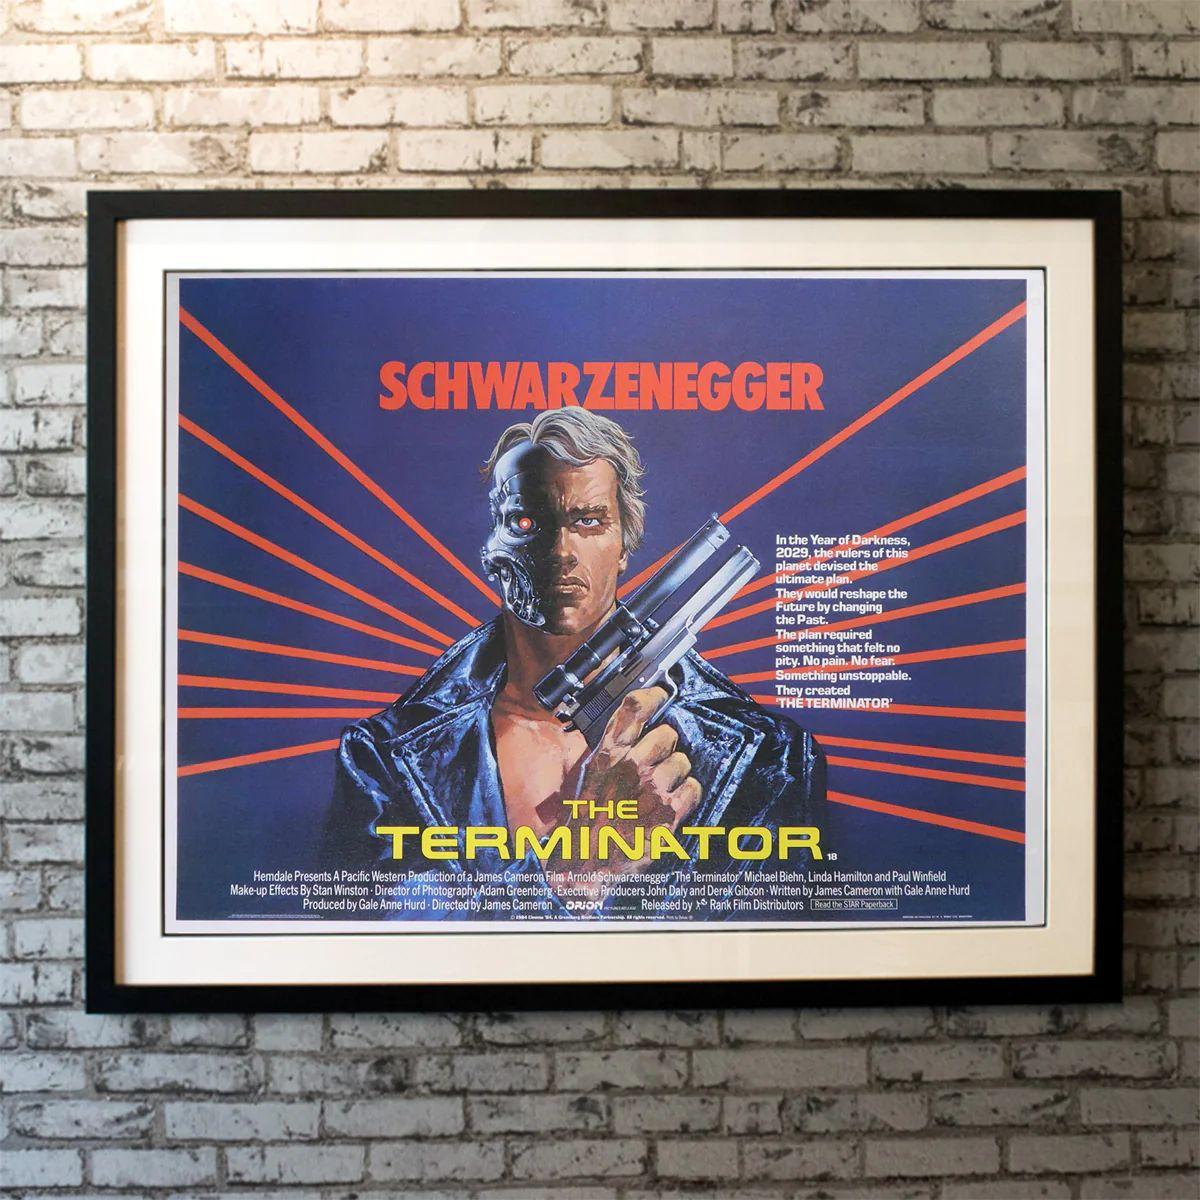 The Terminator, Unframed Poster, 1985

Original British Quad (30 X 40 Inches). A human soldier is sent from 2029 to 1984 to stop an almost indestructible cyborg killing machine, sent from the same year, which has been programmed to execute a young